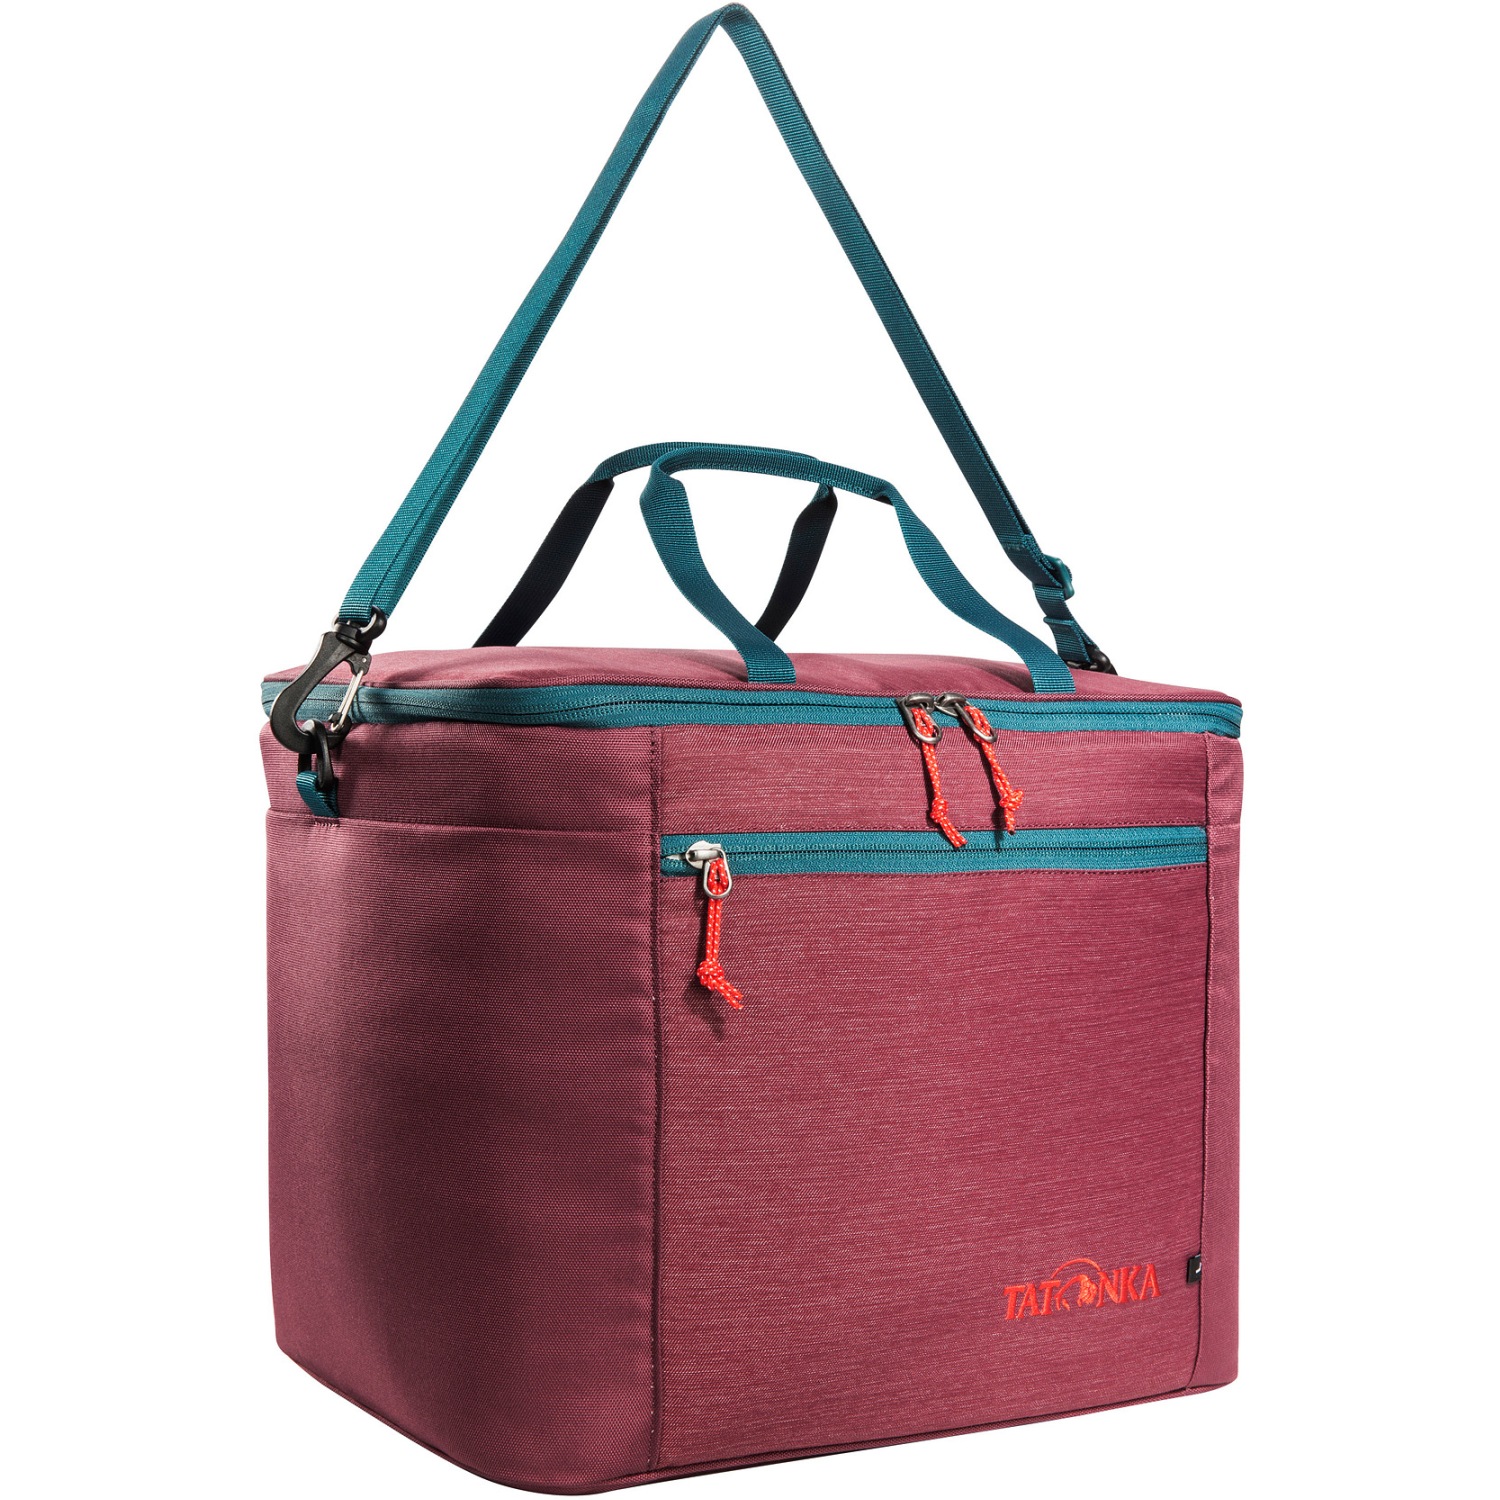 Picture of Tatonka Cooler Bag L - bordeaux red